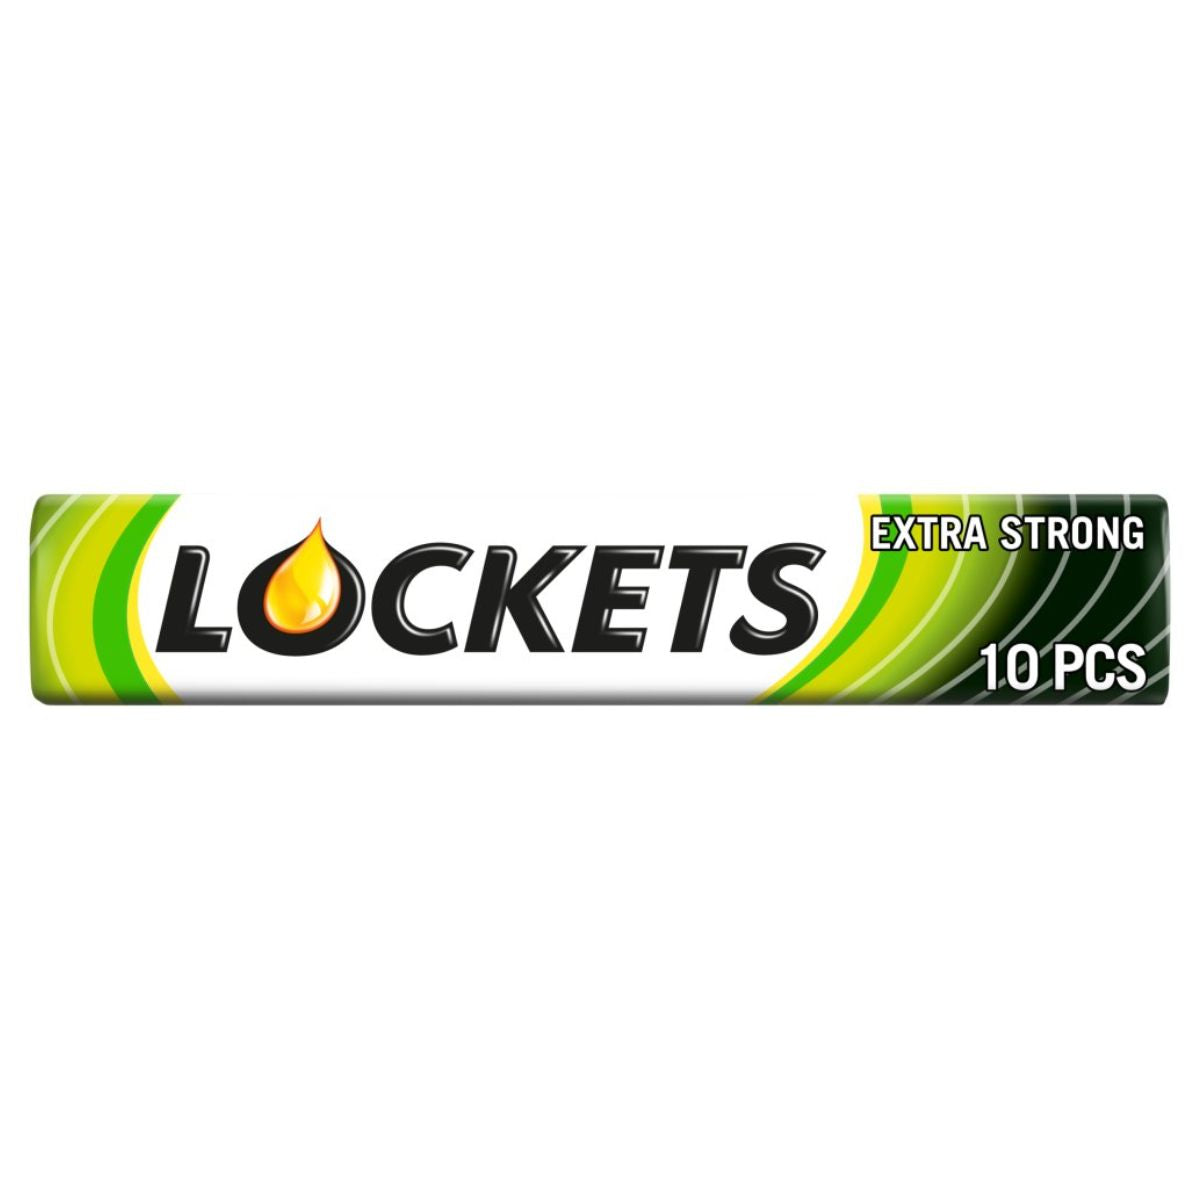 The logo for Lockets - Extra Strong Lozenges - 41g is shown on a white background.